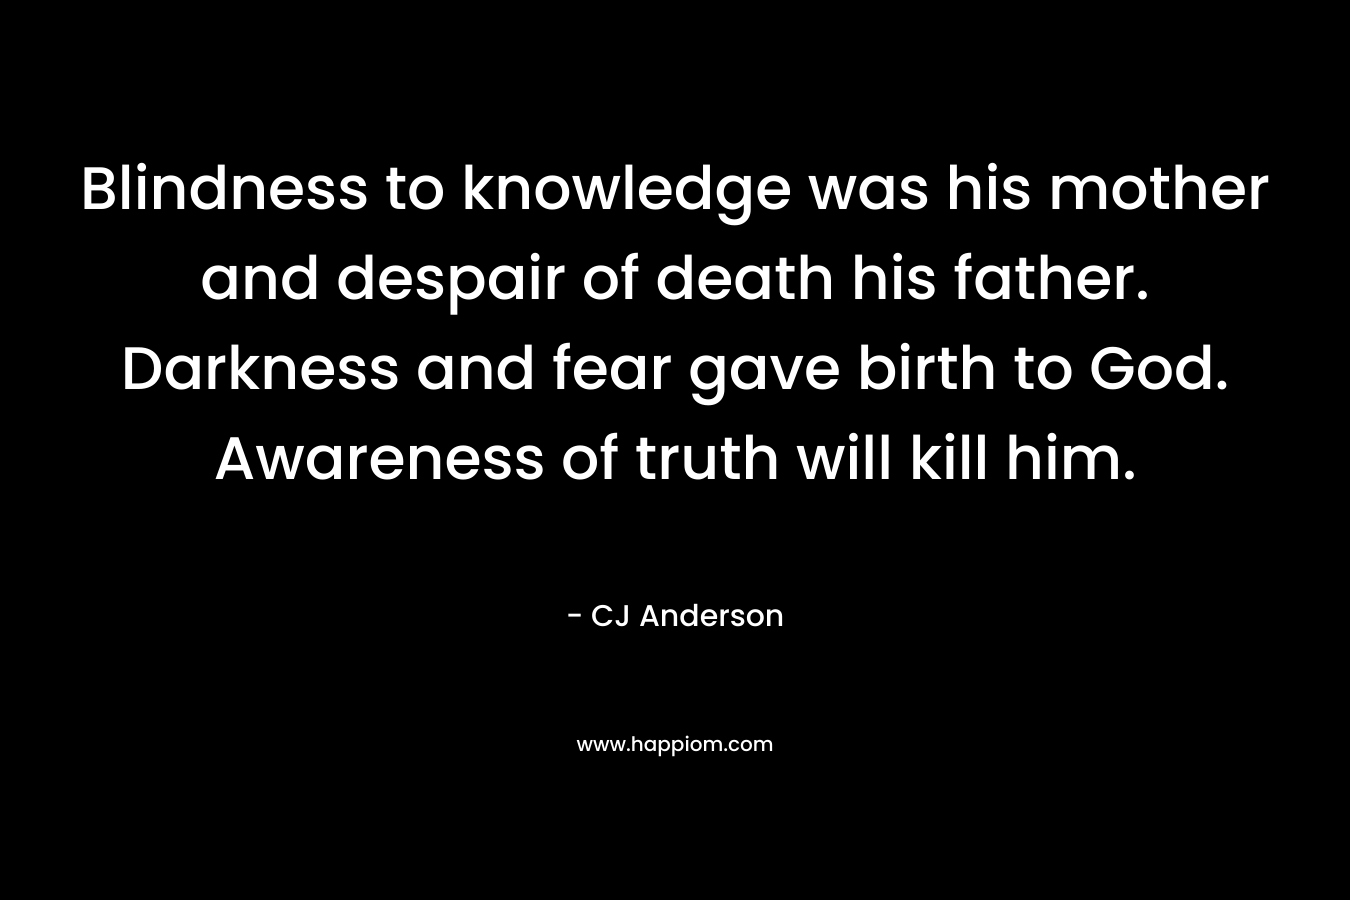 Blindness to knowledge was his mother and despair of death his father. Darkness and fear gave birth to God. Awareness of truth will kill him. – CJ Anderson